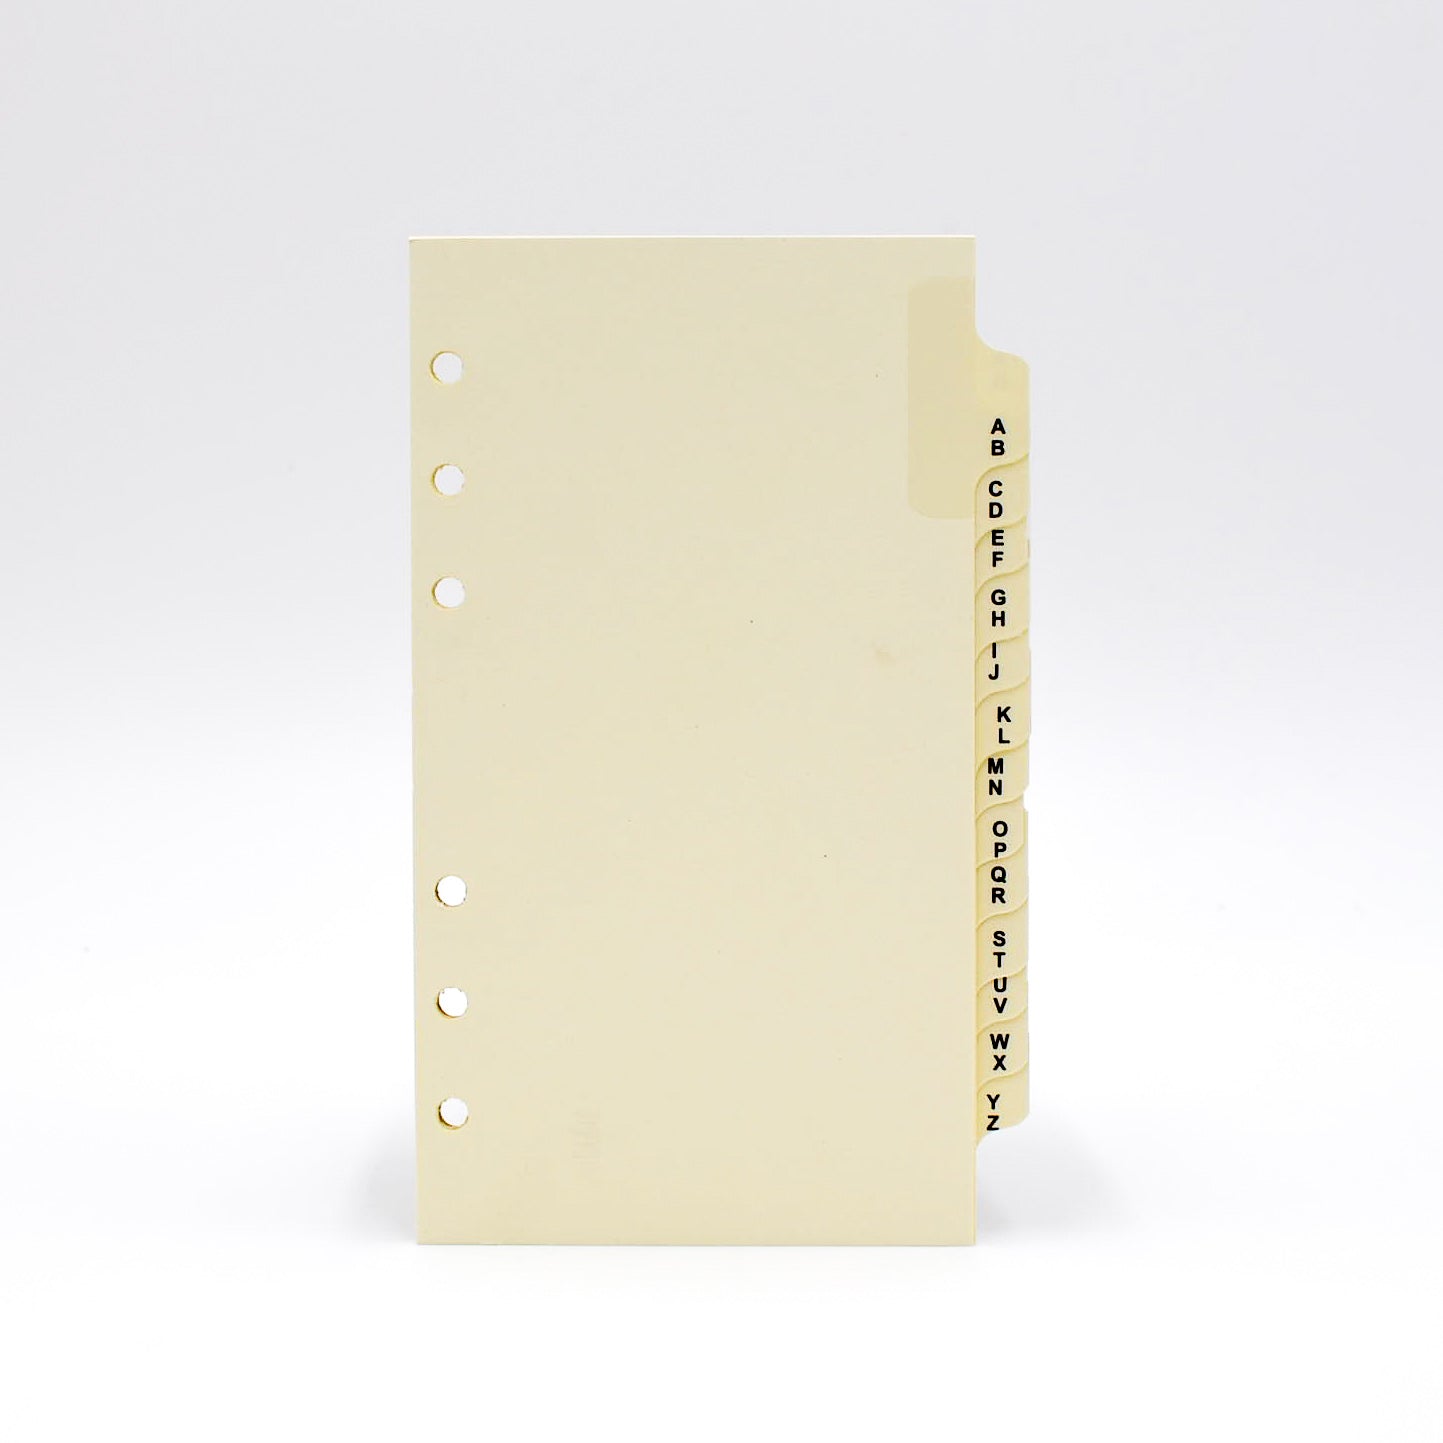 Sungraphix Louis Vuitton Preference Collection Item PC3D646 6 3/4" x 3 3/4" 6-Ring Address Tabs addresses tab refill refills insert inserts pages page paper ivory white alpha alphabet telephone phone a to z 6 hole punched ring rings holes